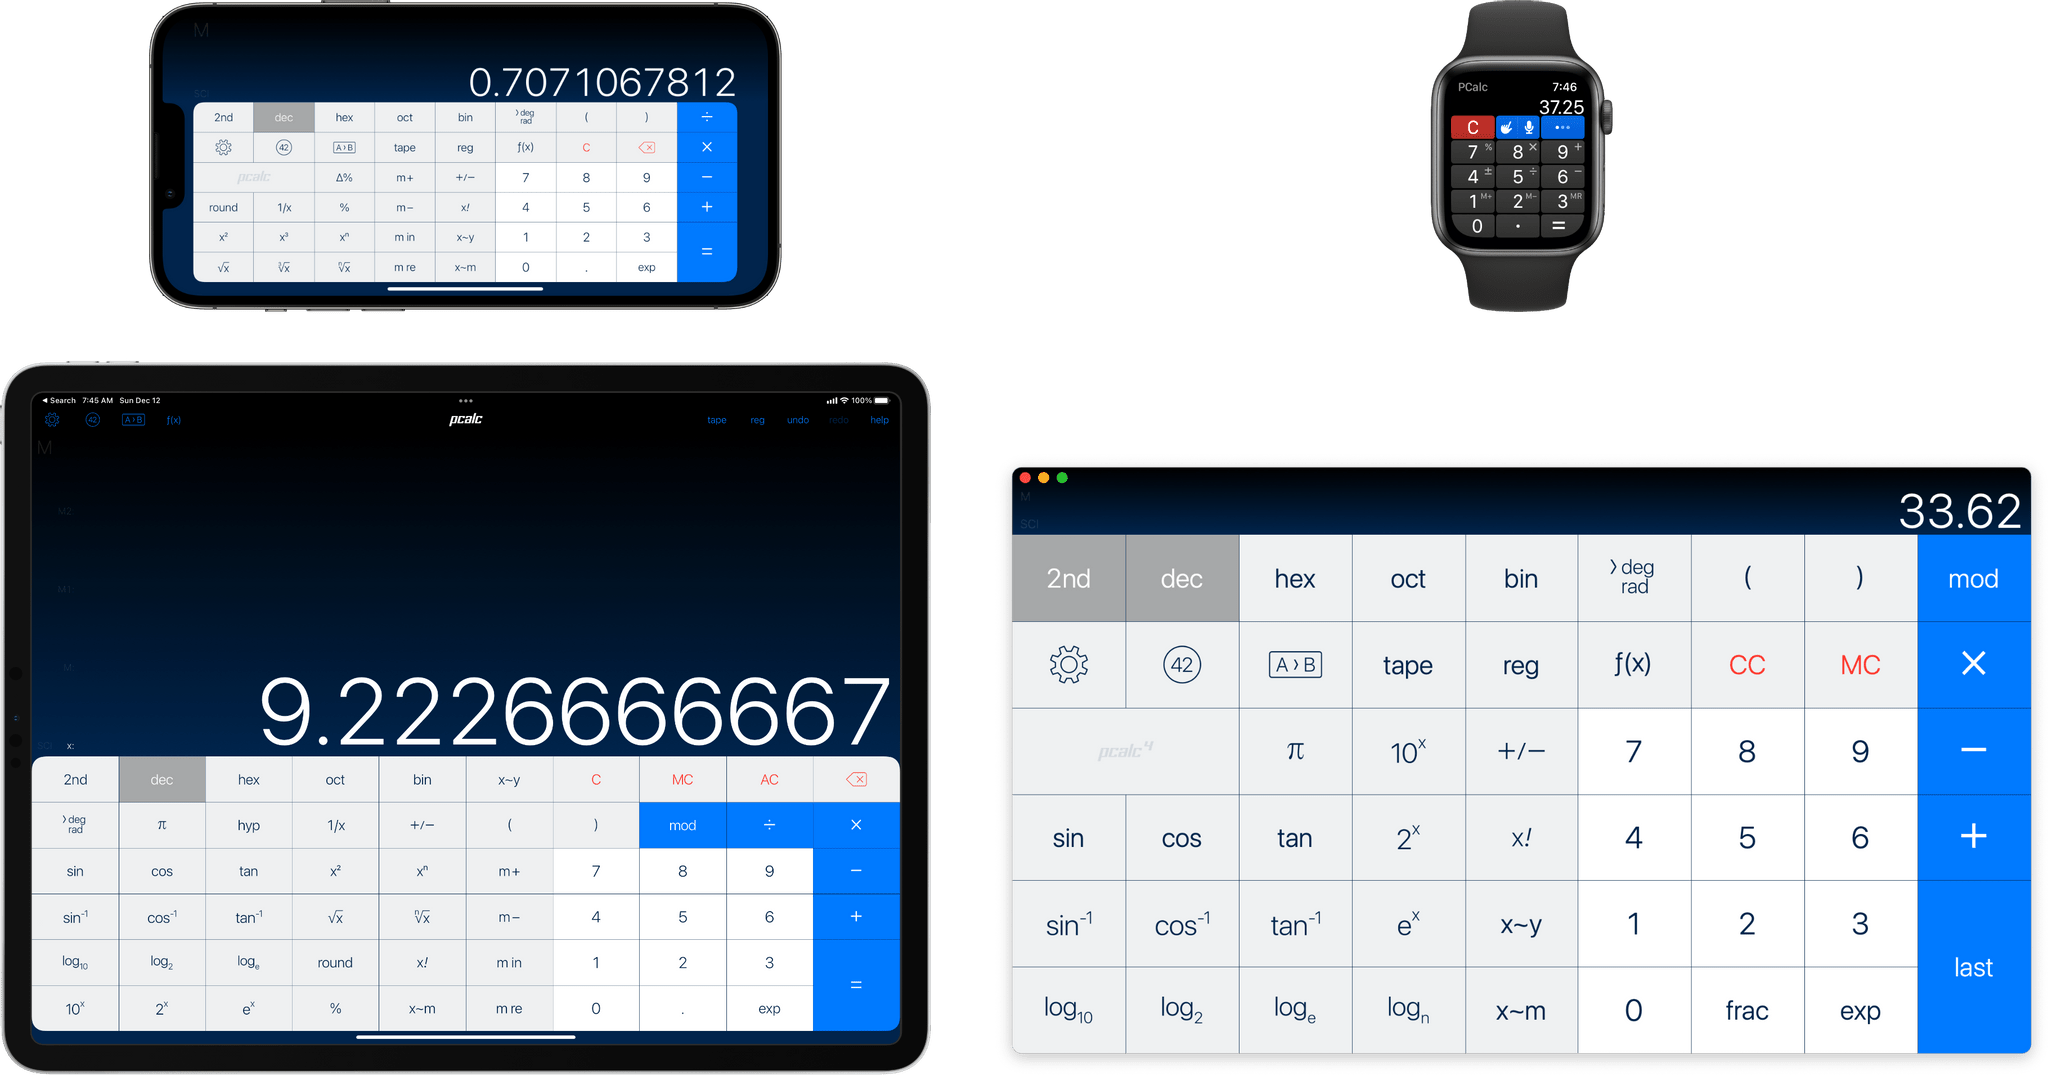 Today, PCalc is available on the iPhone, Apple Watch, iPad, and Mac (pictured) as well as the Apple TV.